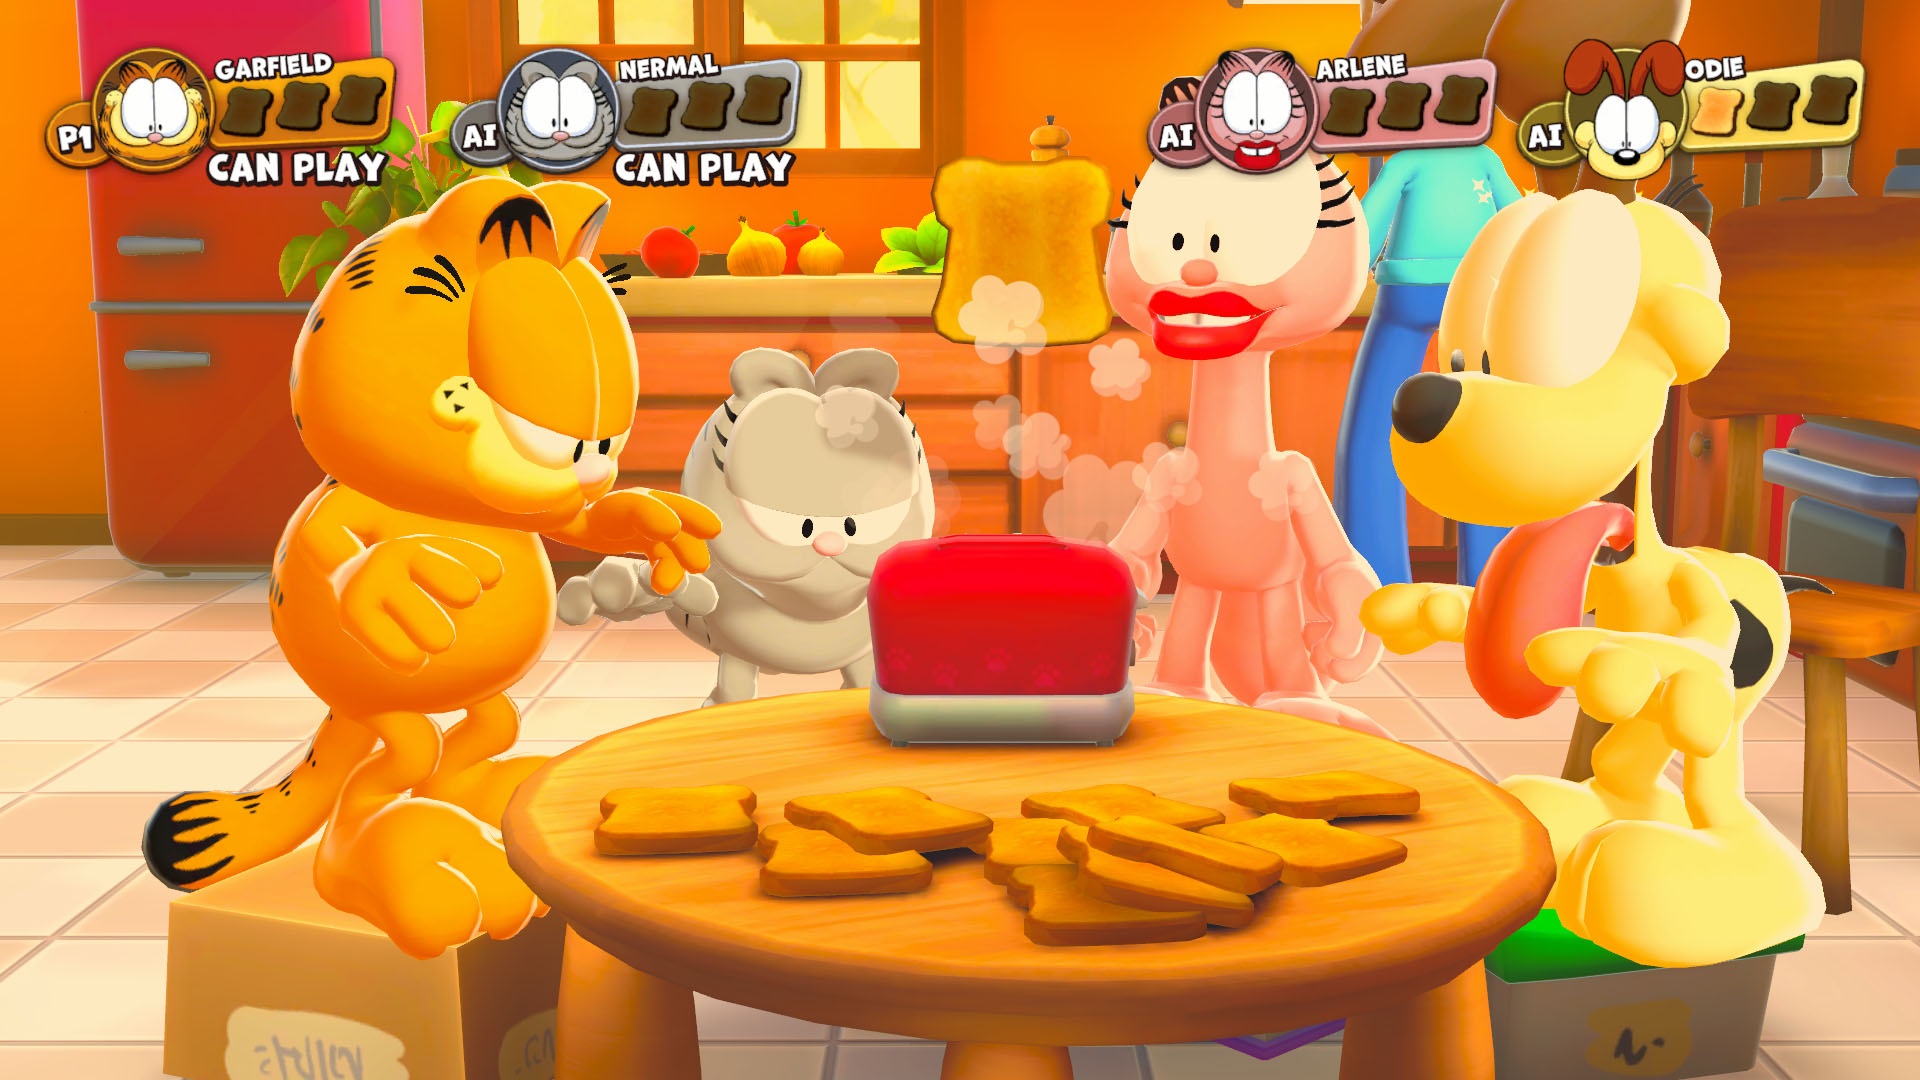 Garfield Lasagna Party gets release dates in November